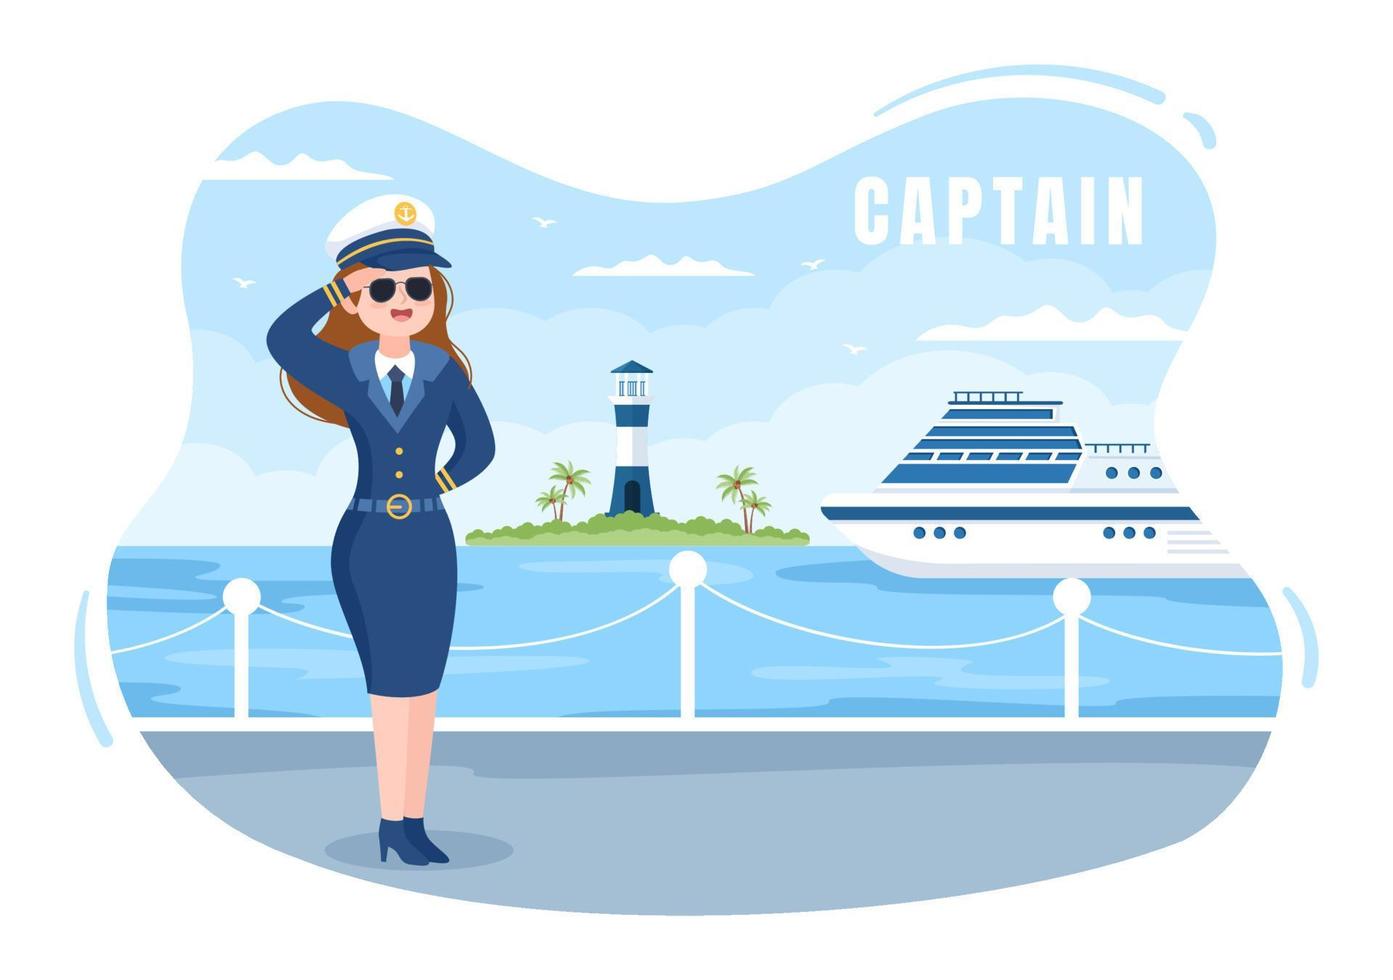 Woman Cruise Ship Captain Cartoon Illustration in Sailor Uniform Riding a Ships, Looking with Binoculars or Standing on the Harbor in Flat Design vector